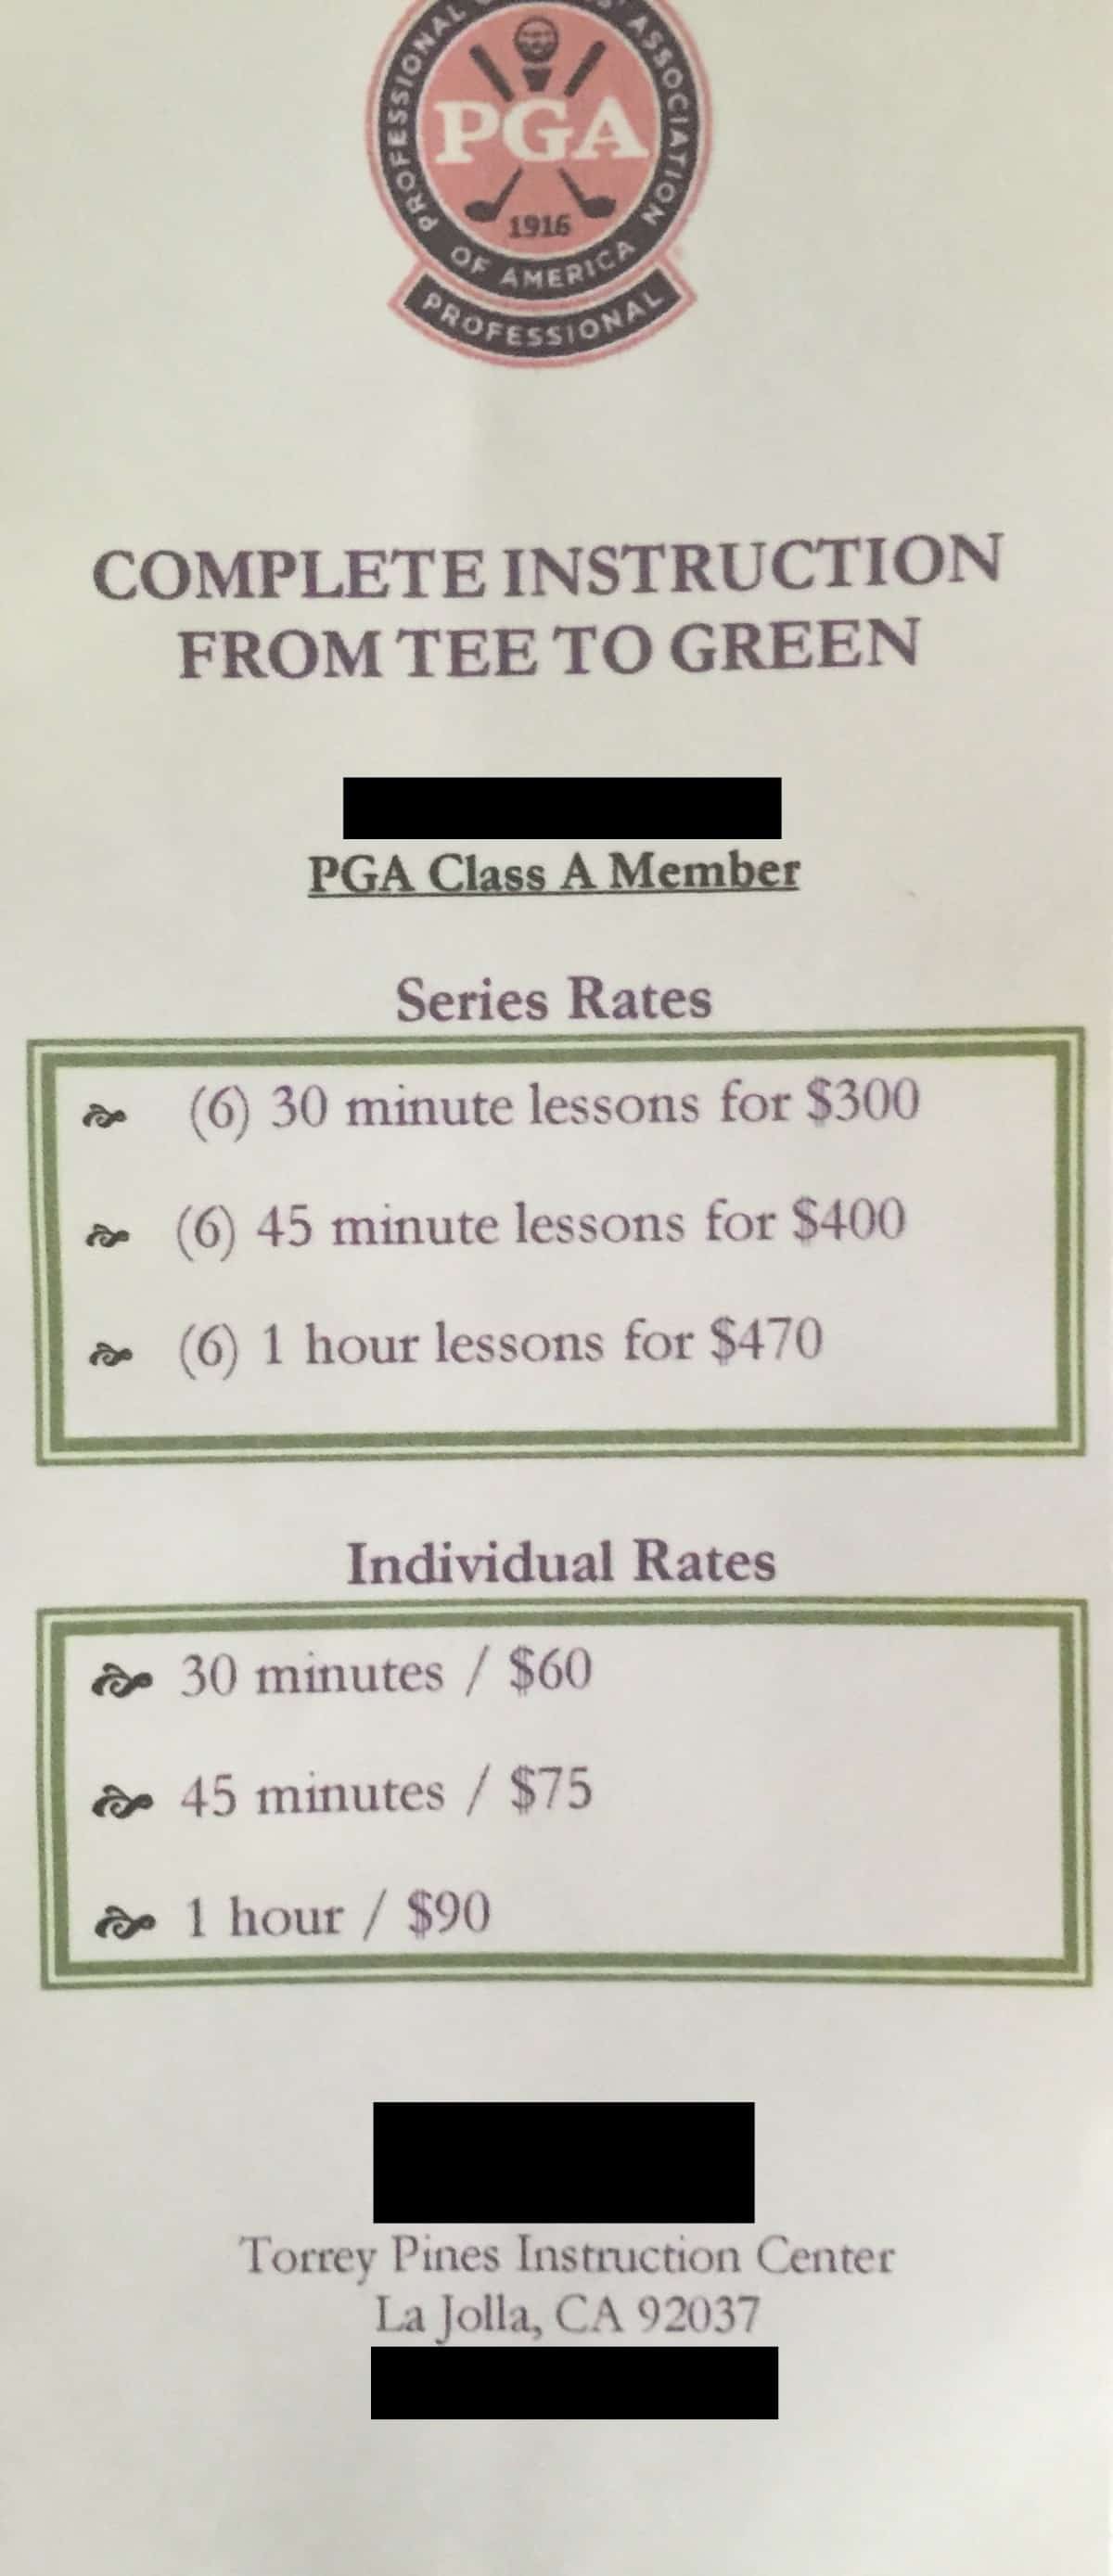 The Power and Distance Challenge is not going to cost you an arm and a leg like private lessons would. Professional PGA instructors can charge upwards of $90 to $100 per hour.